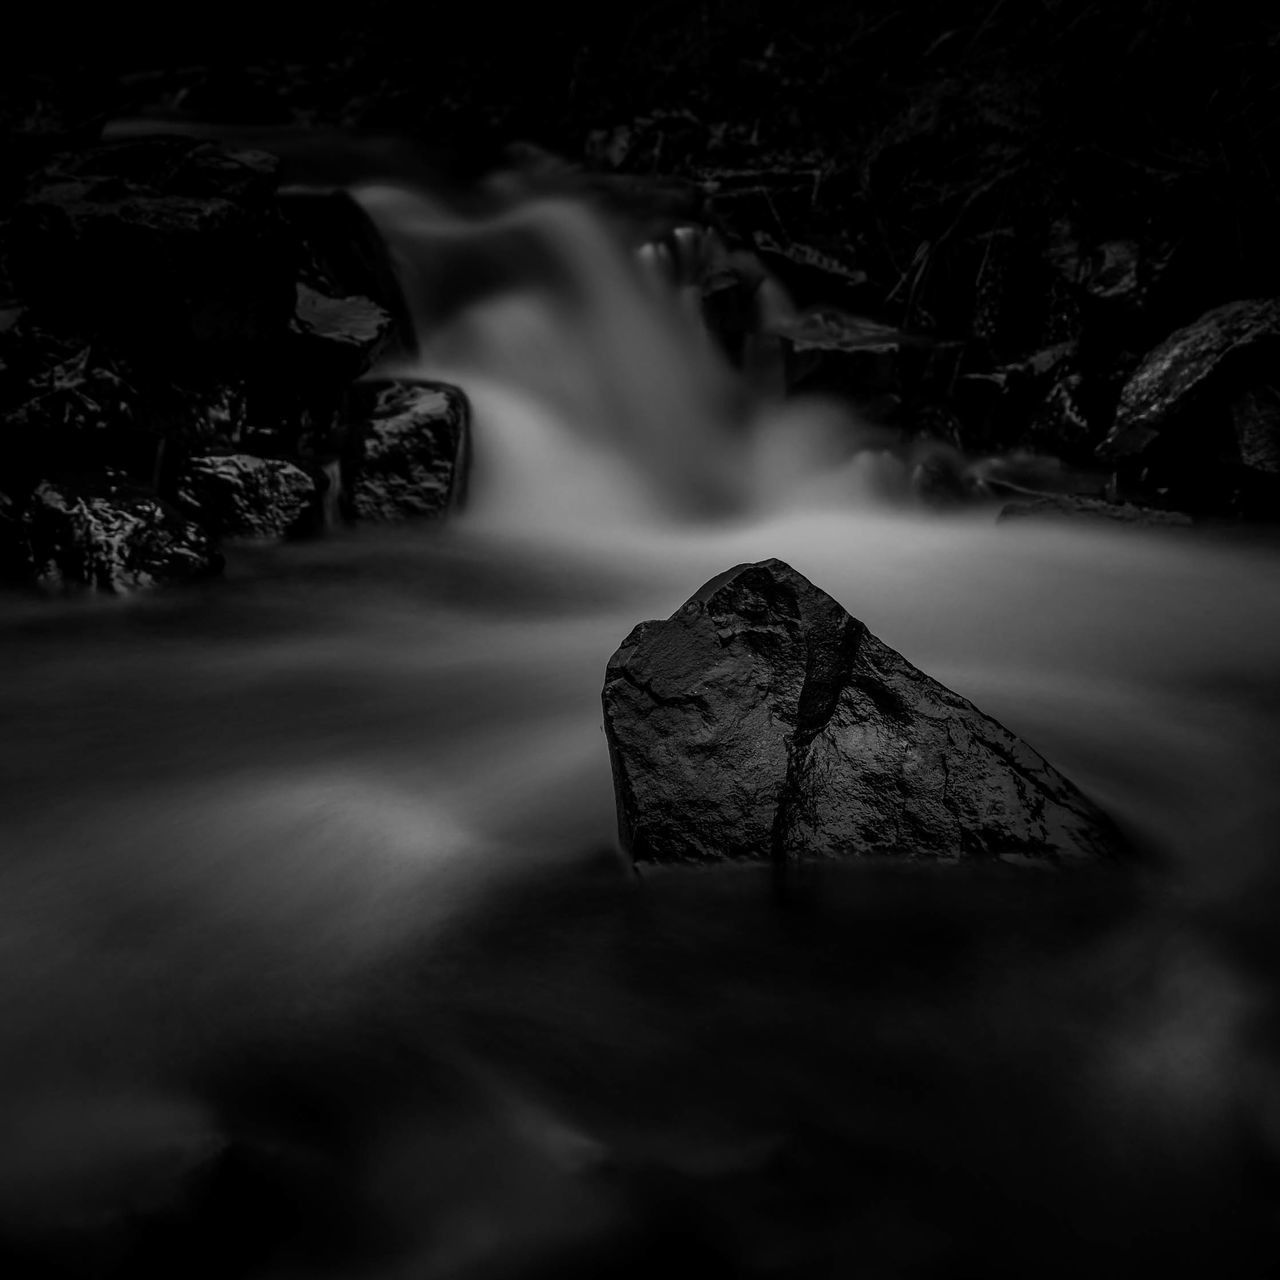 BLURRED MOTION OF ROCKS IN WATER